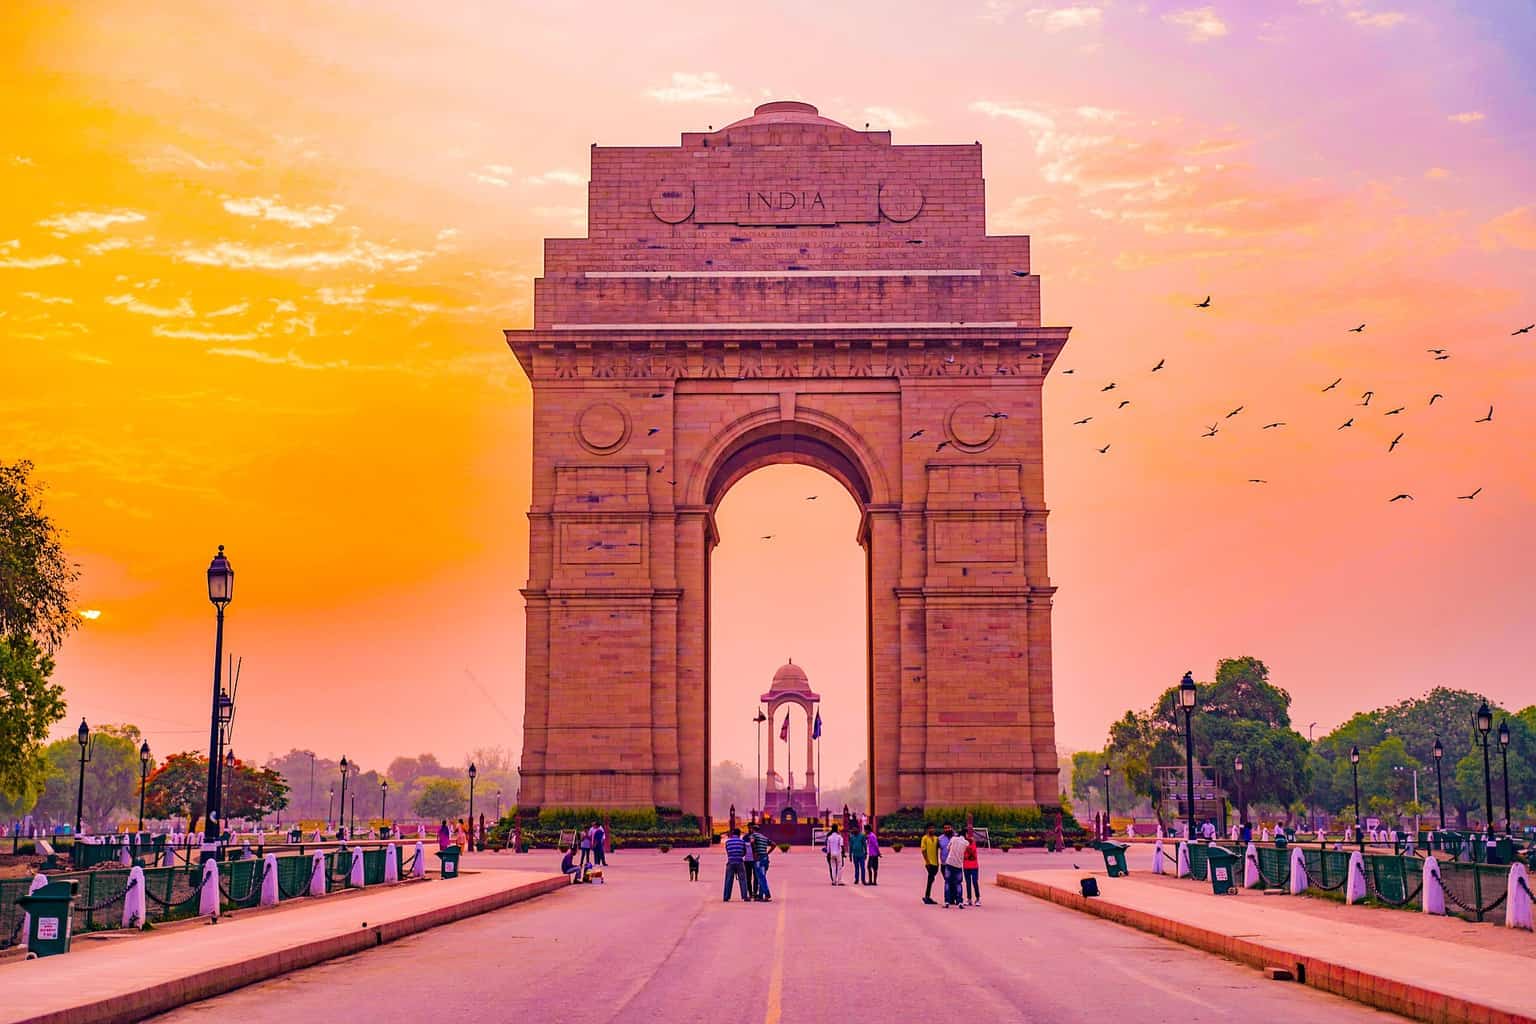 Delhi Travel Guide: The City You Need To Hate In Order To Start Loving It